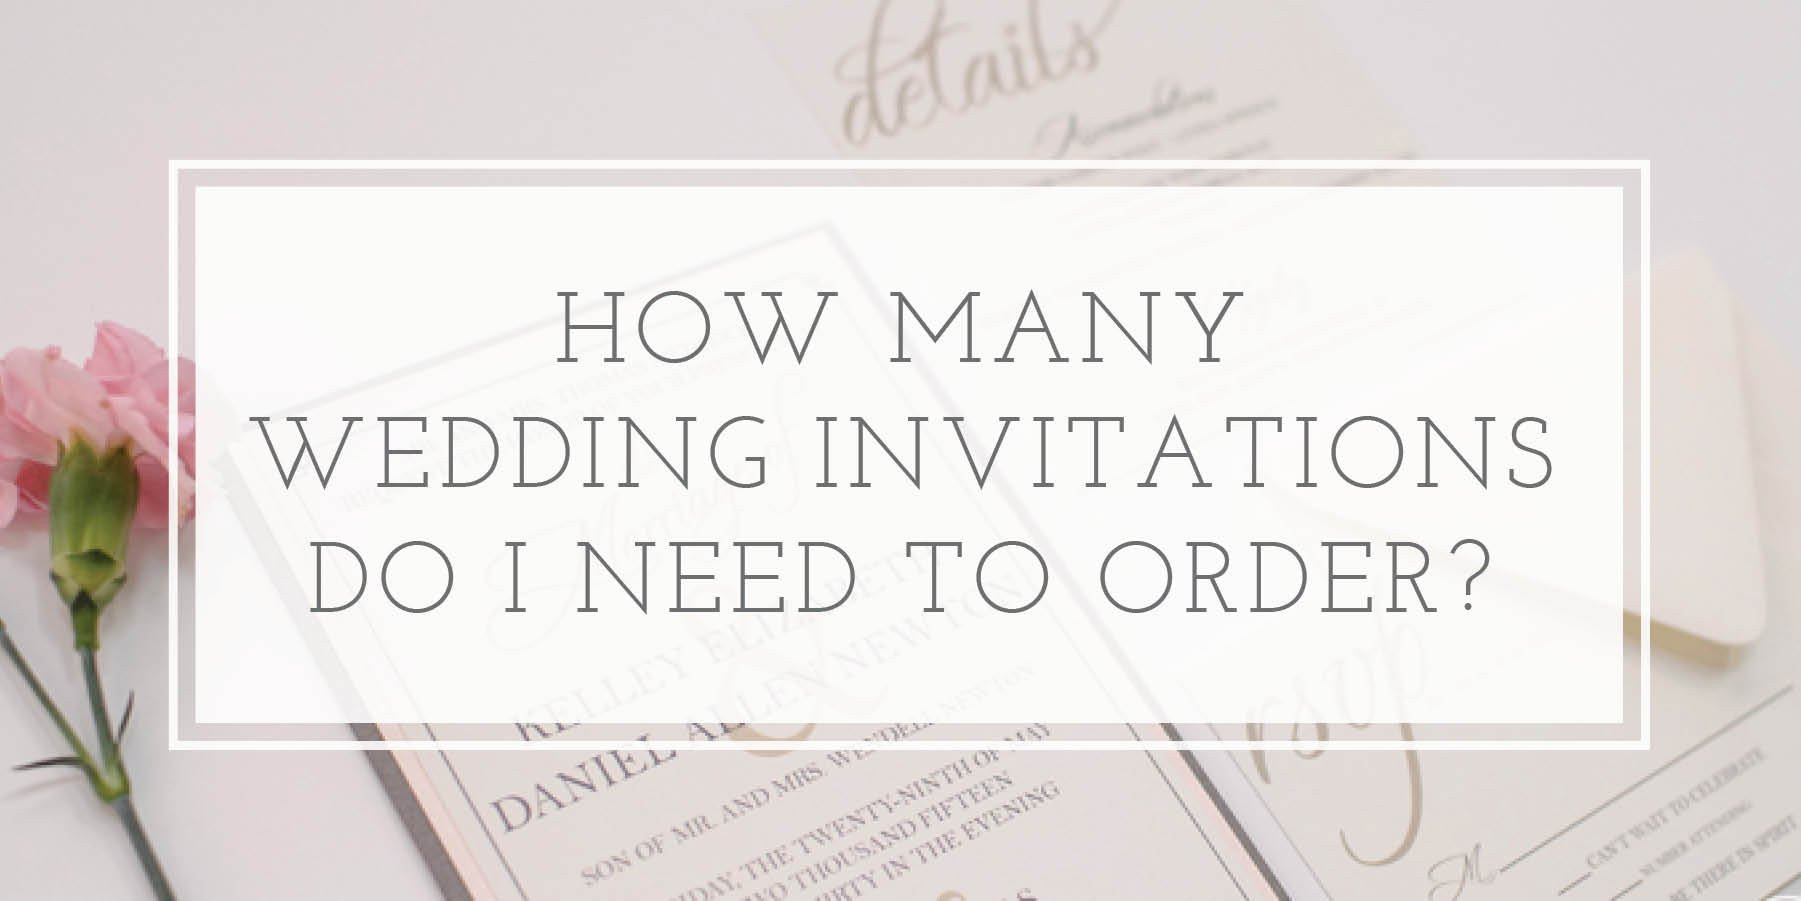 When To Order Wedding Invitations
 How Many Wedding Invitations Should I Order